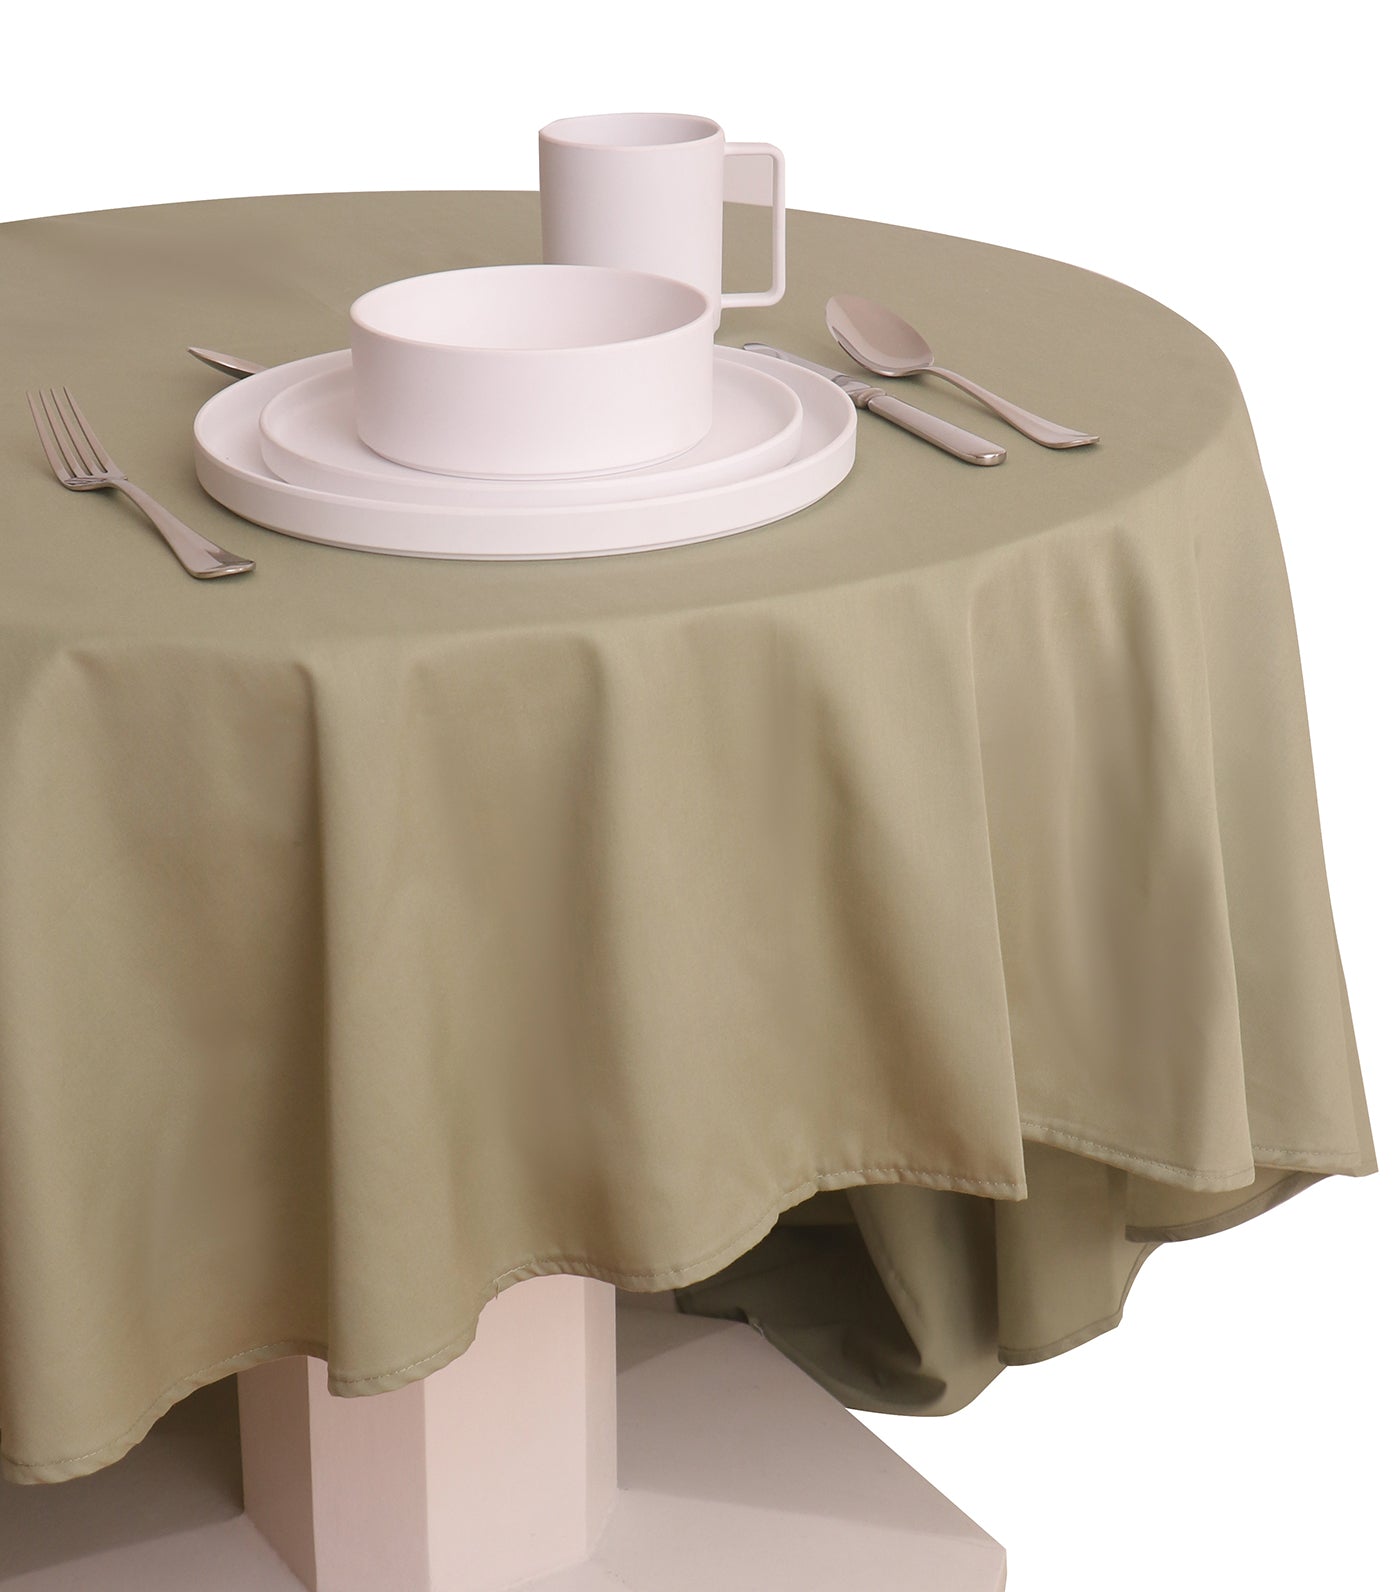 Rustan's Home Cotton Tablecloth - Round